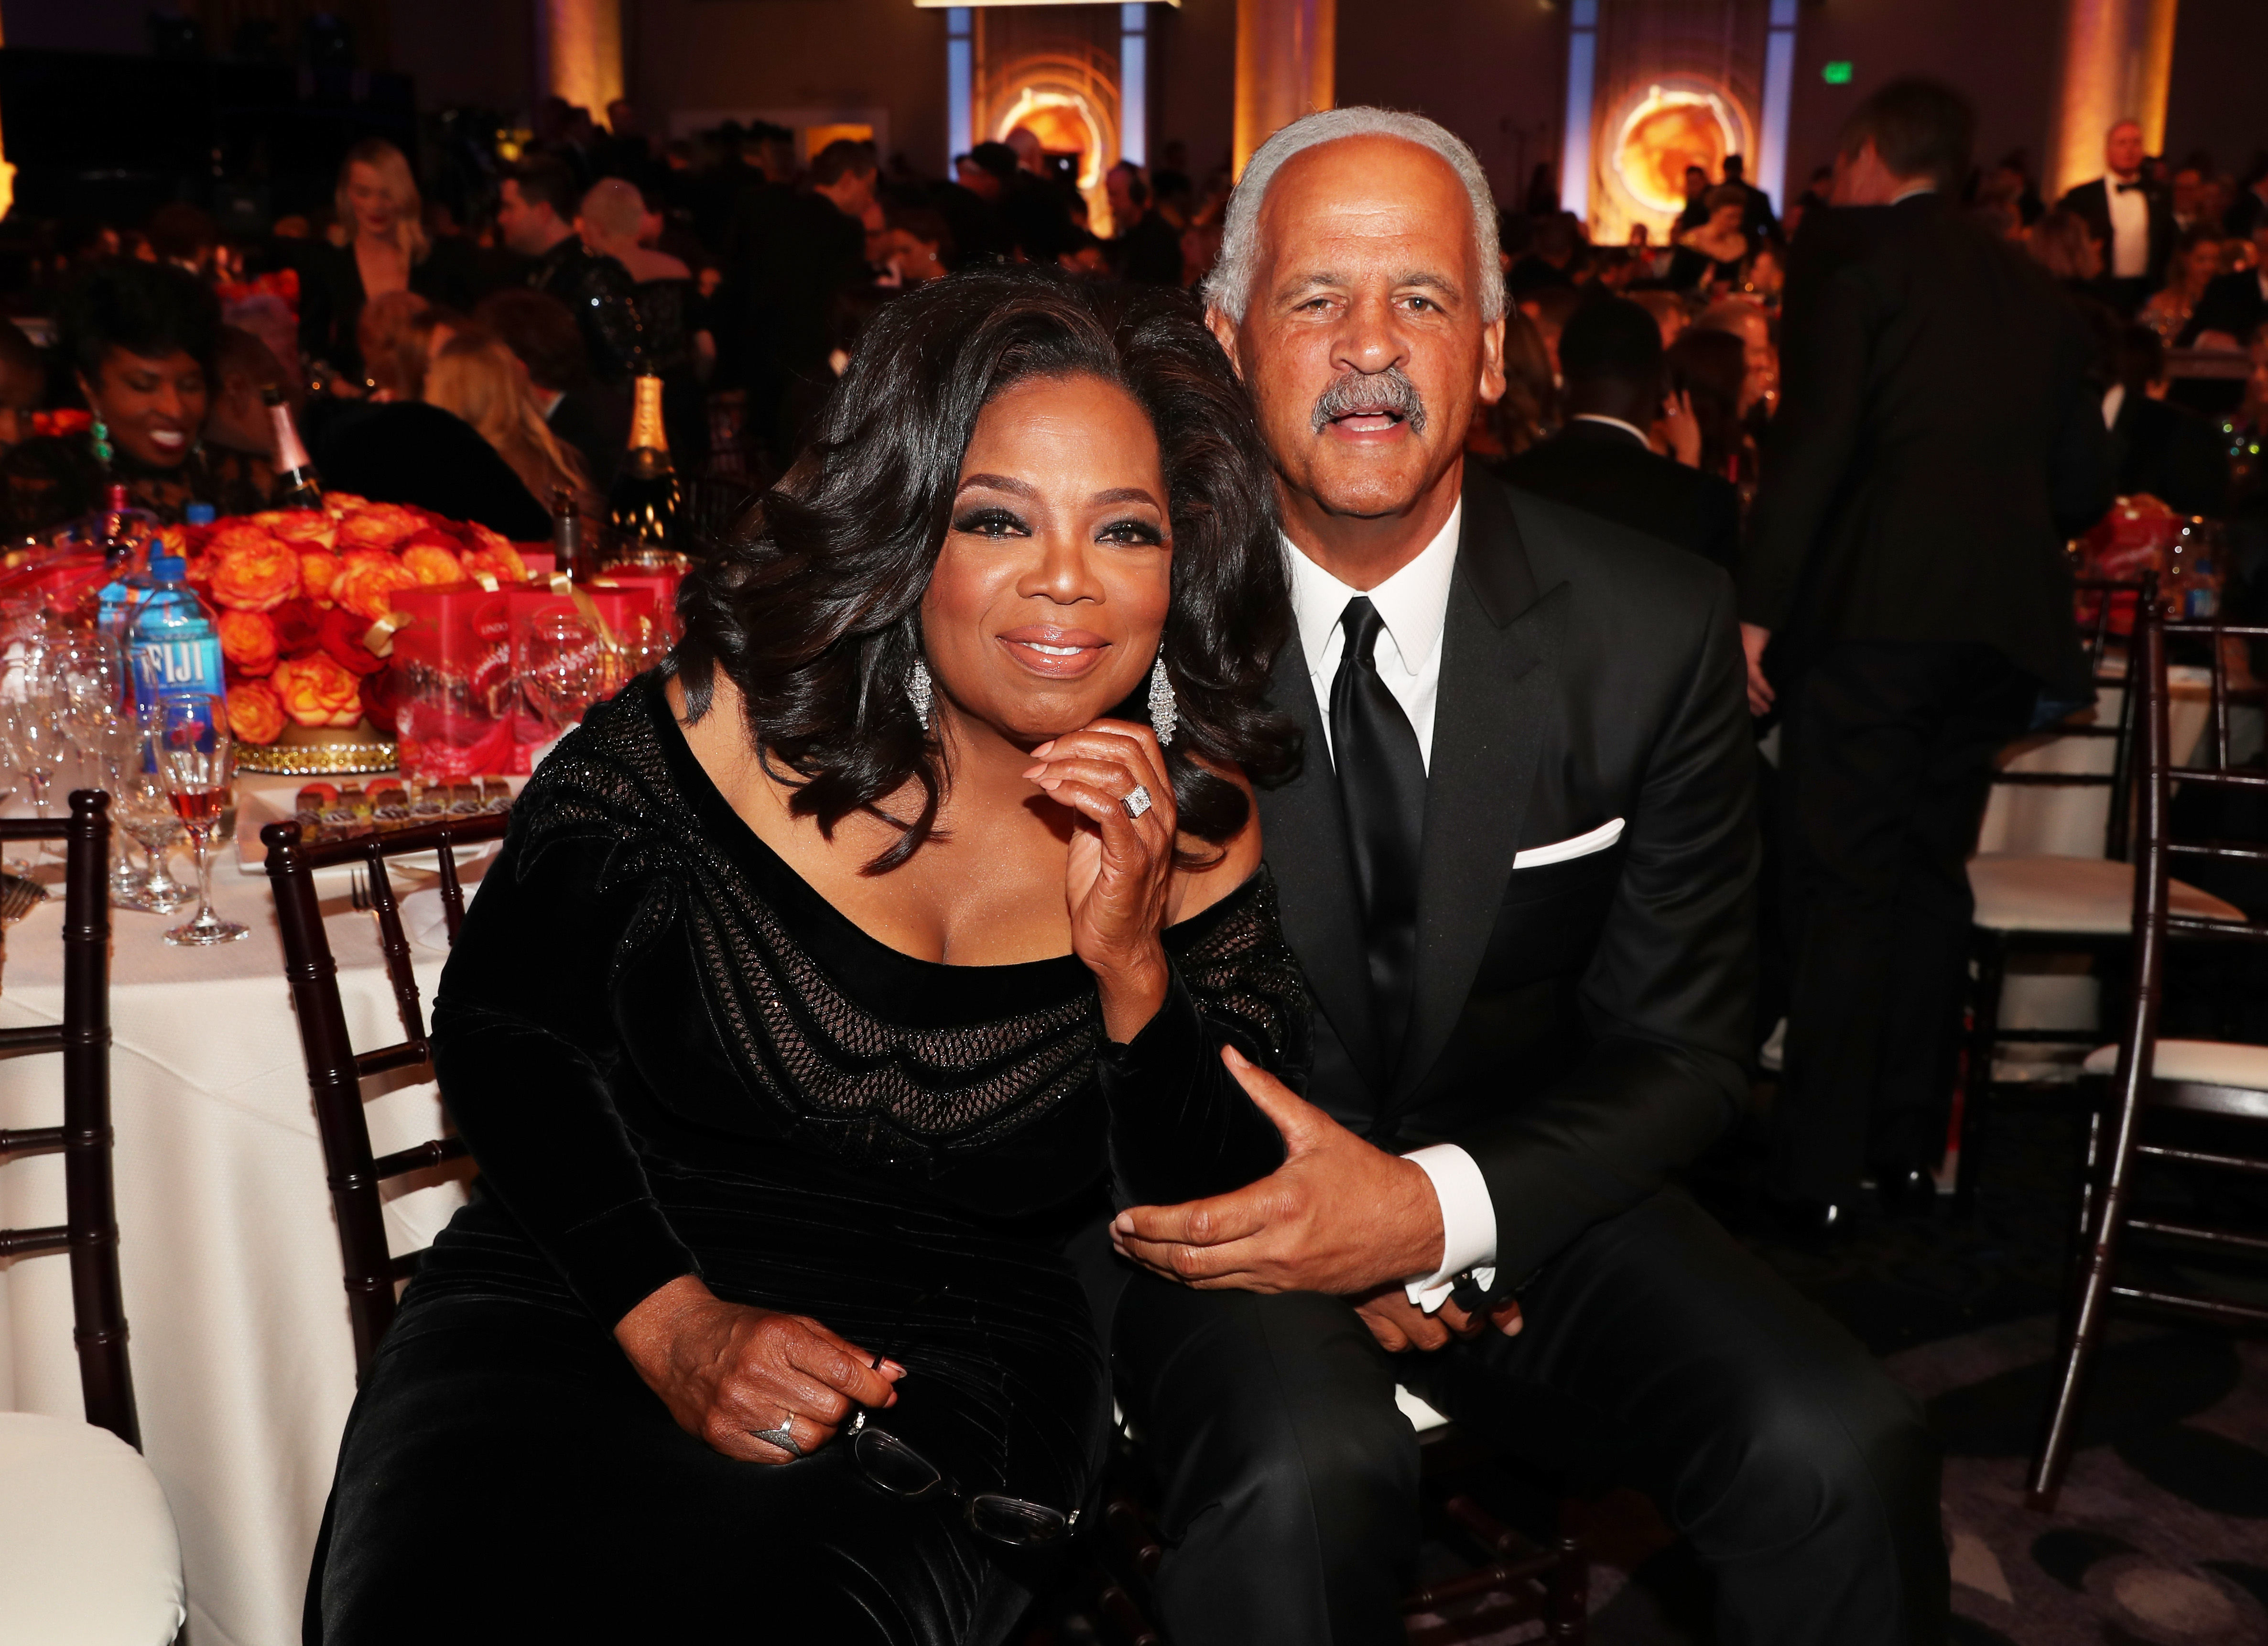 Oprah Winfrey and Stedman Graham in Beverly Hills, California on January 7, 2018 | Source: Getty Images